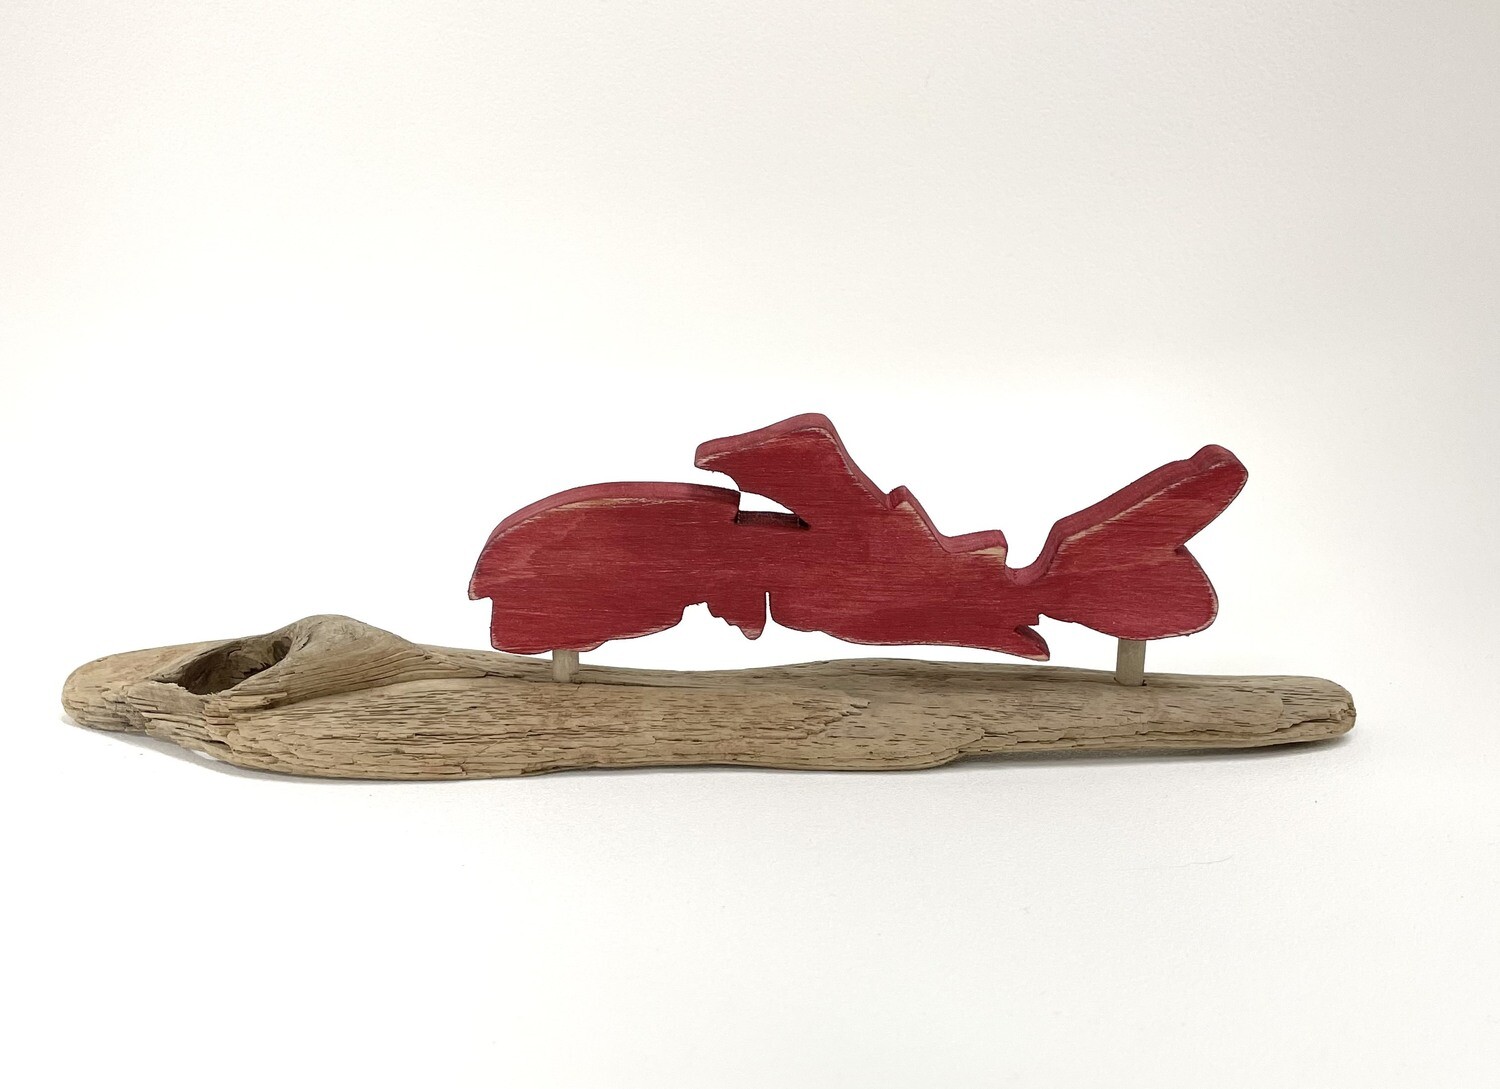 Small Red Nova Scotia on Driftwood- Jerry Walsh 